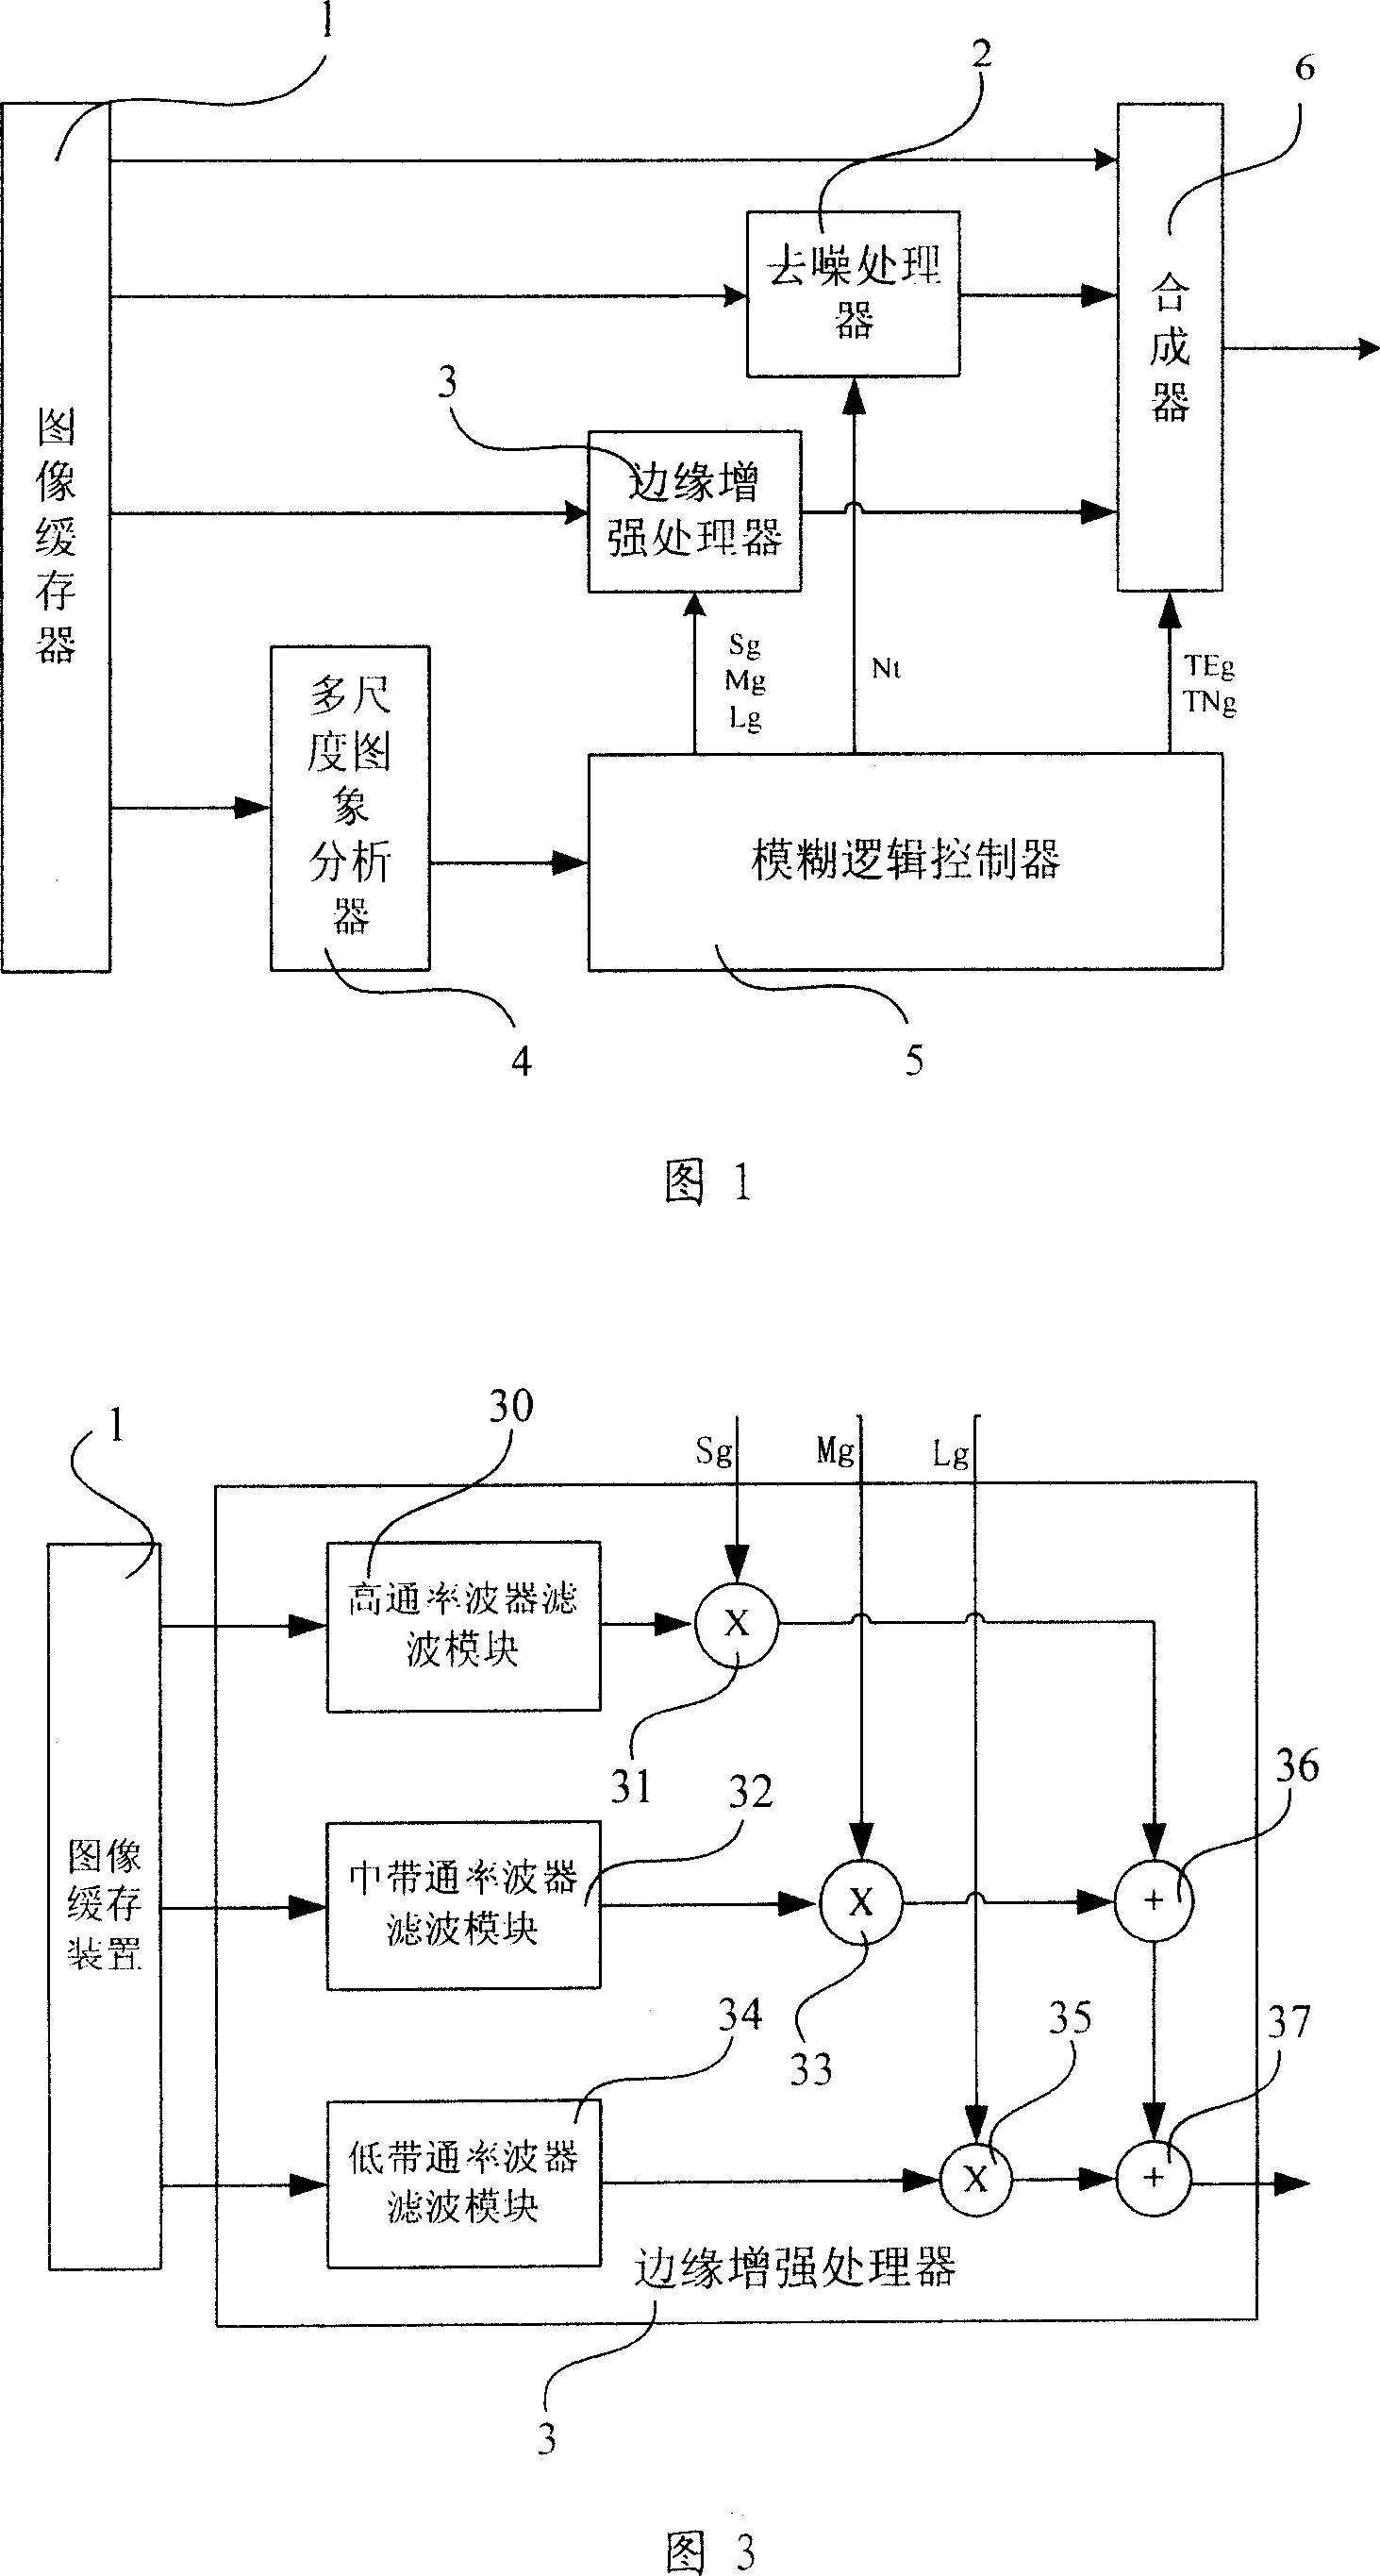 Picture reinforcing treatment system and treatment method